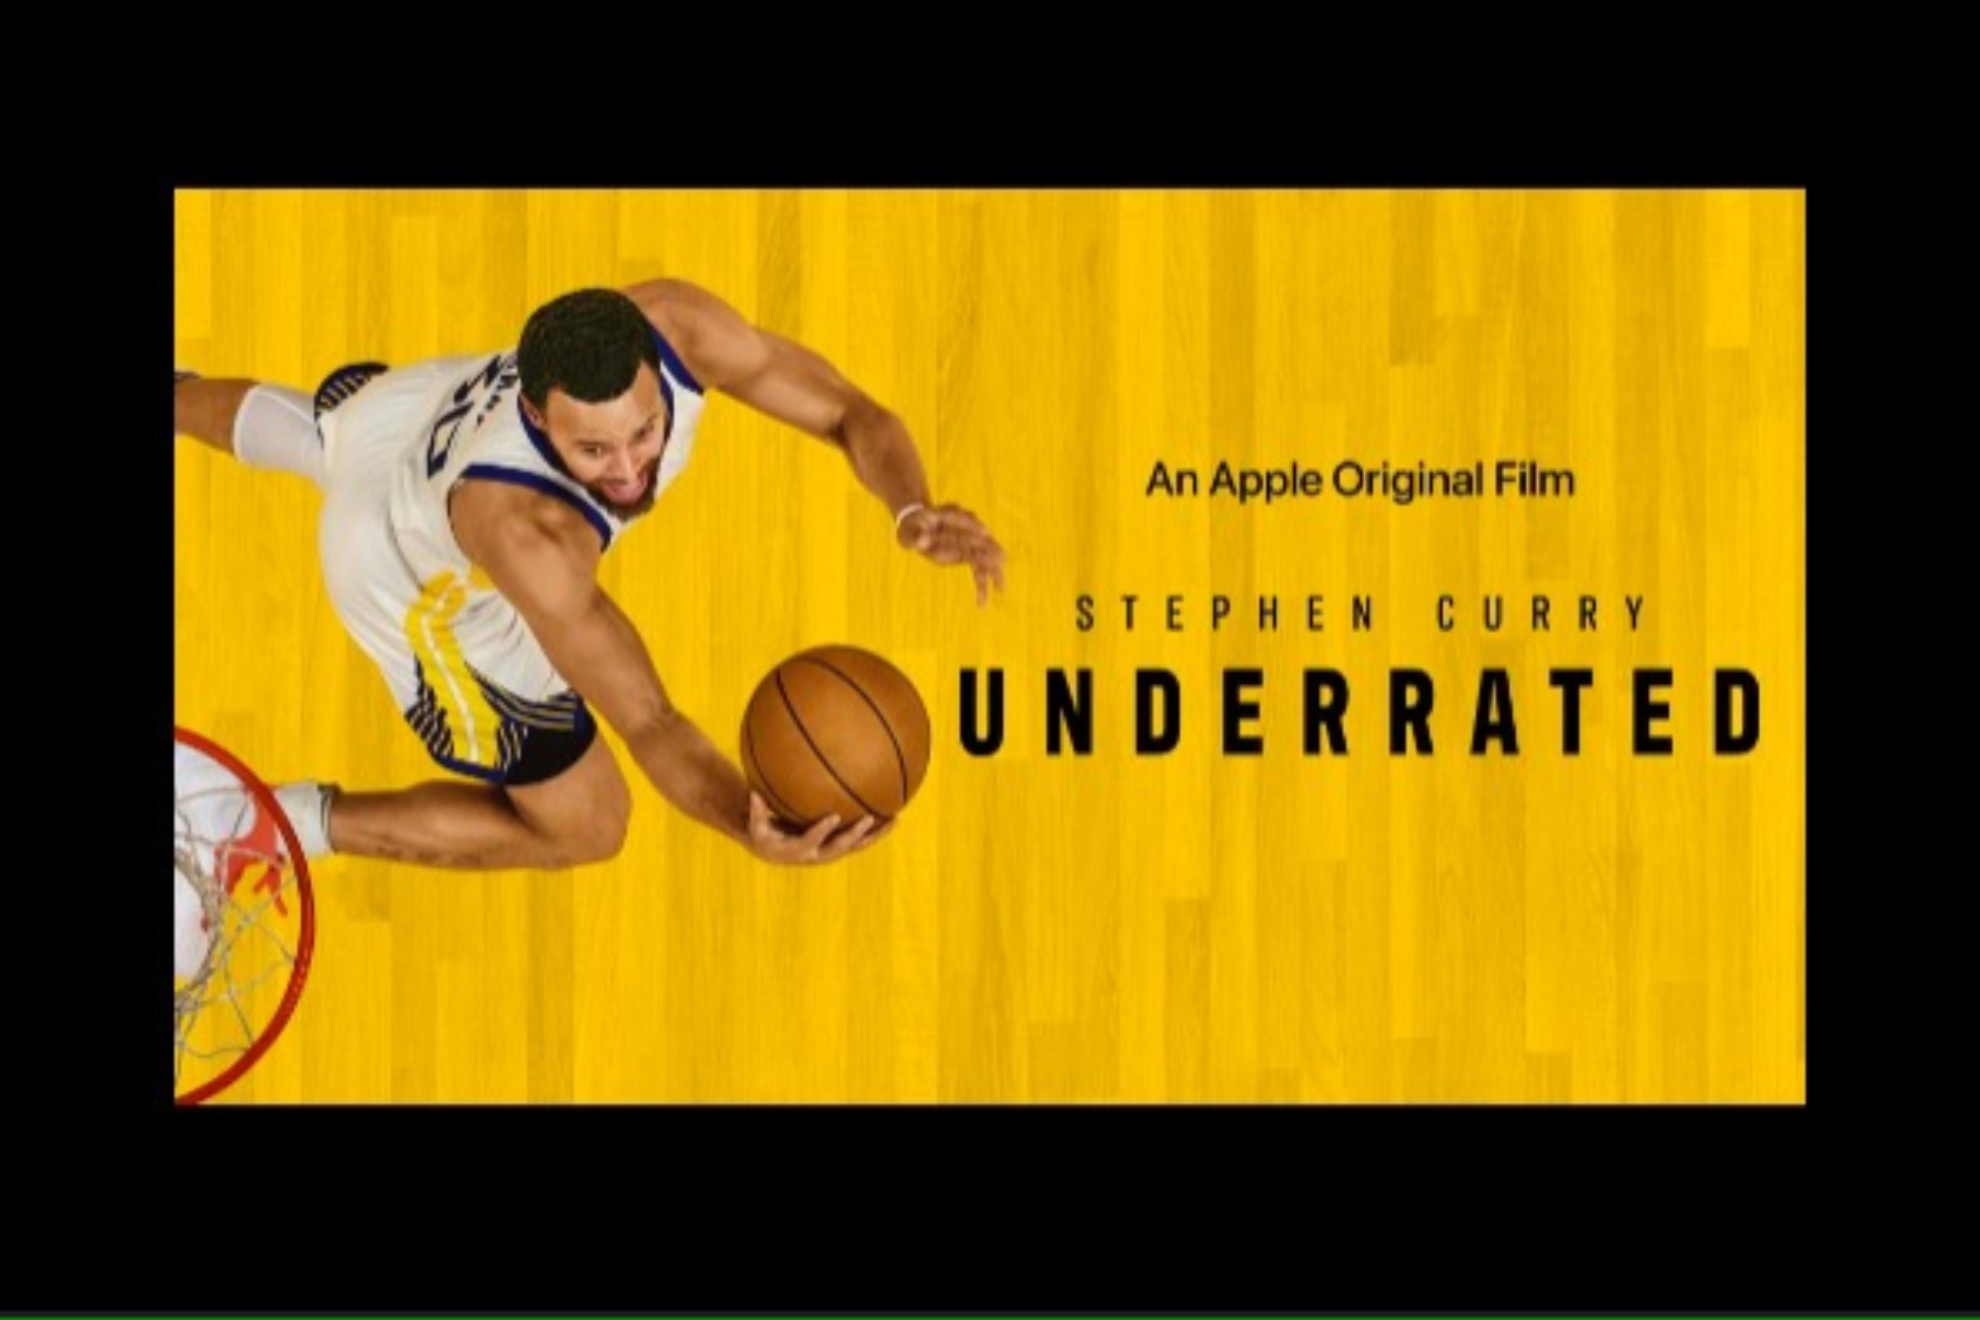 Steph Curry will tell his personal journey in basketball in the documentary film by Apple TV+ 'Underrated'